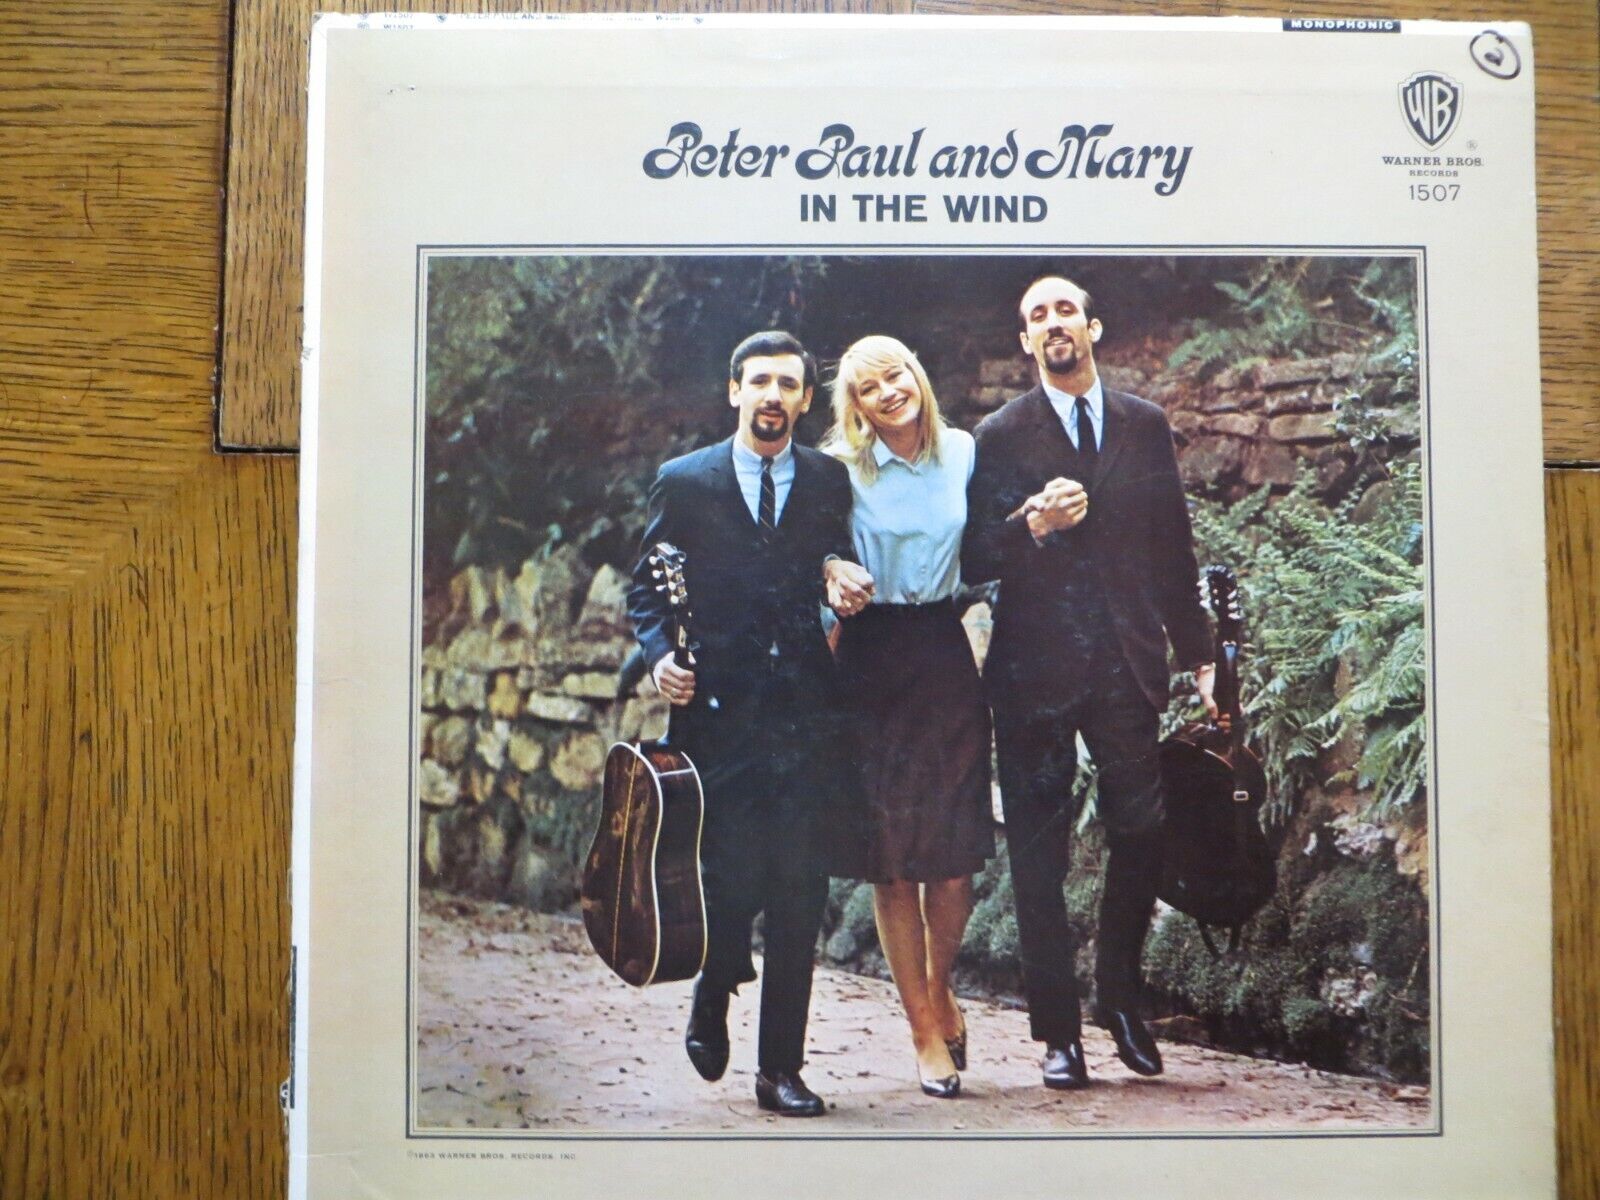 Peter, Paul And Mary - In The Wind - 1963 - Warner Bros. W 1507 Vinyl Record